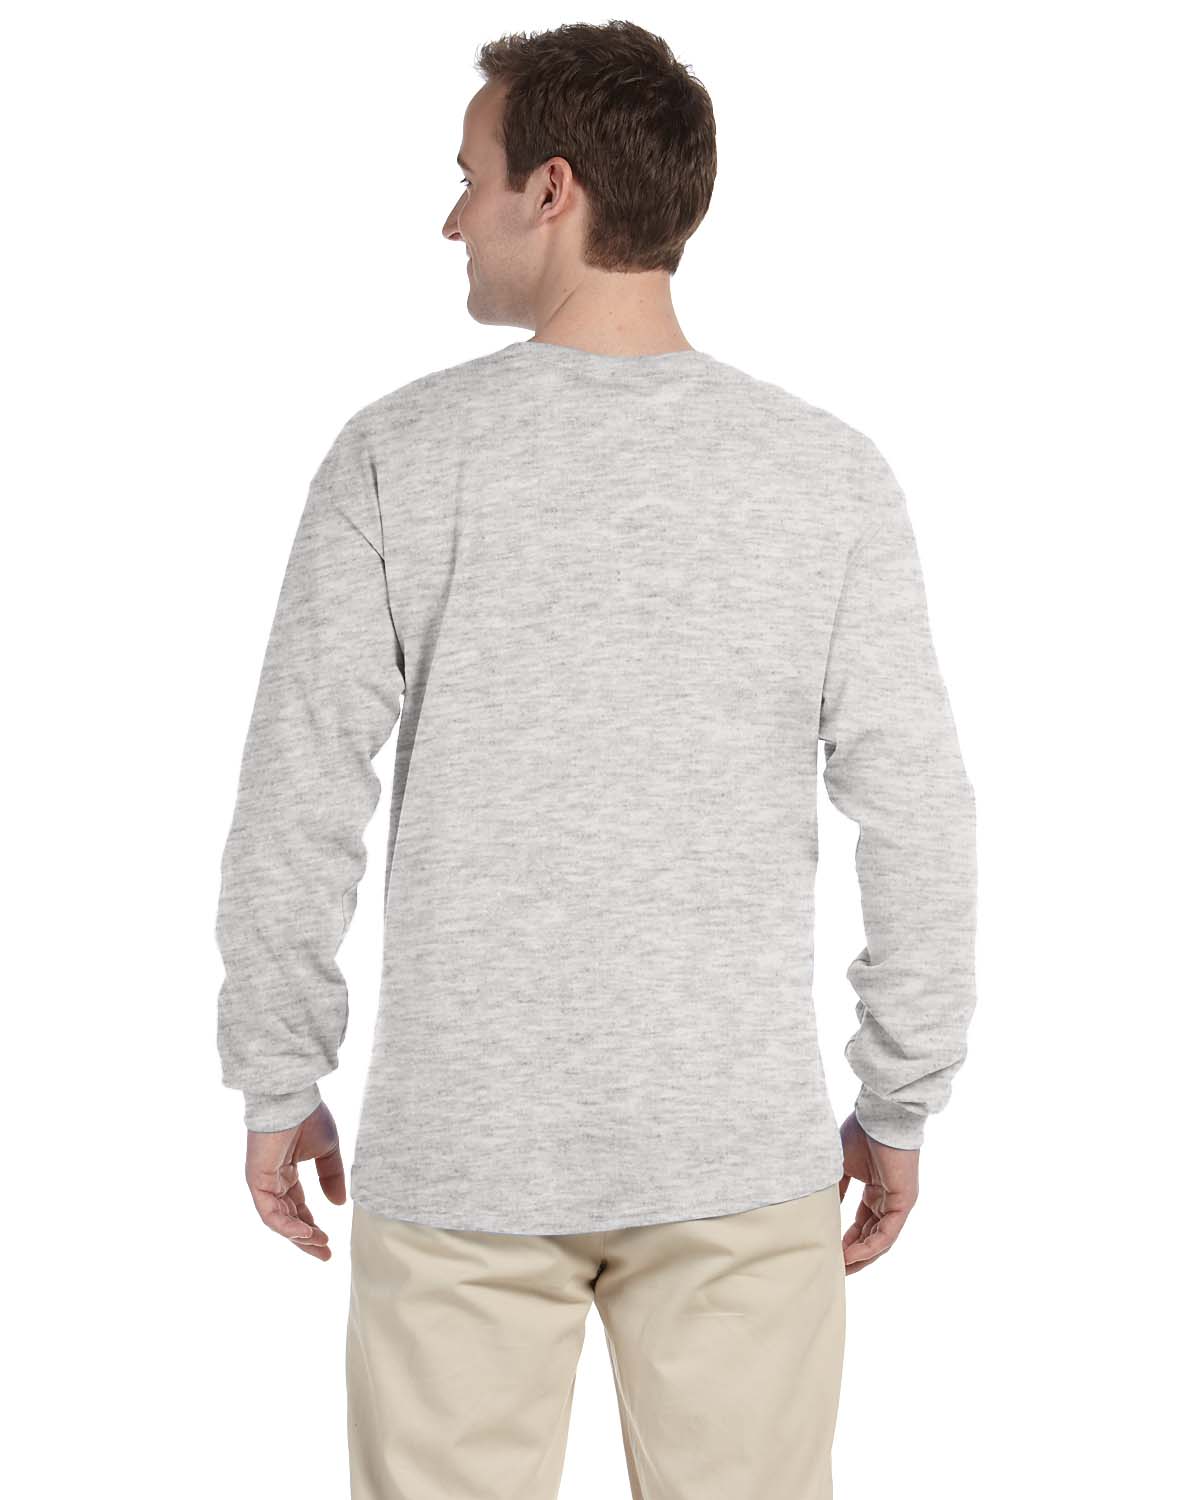 Fruit of the Loom Long Sleeve T-Shirt at wholesale Prices